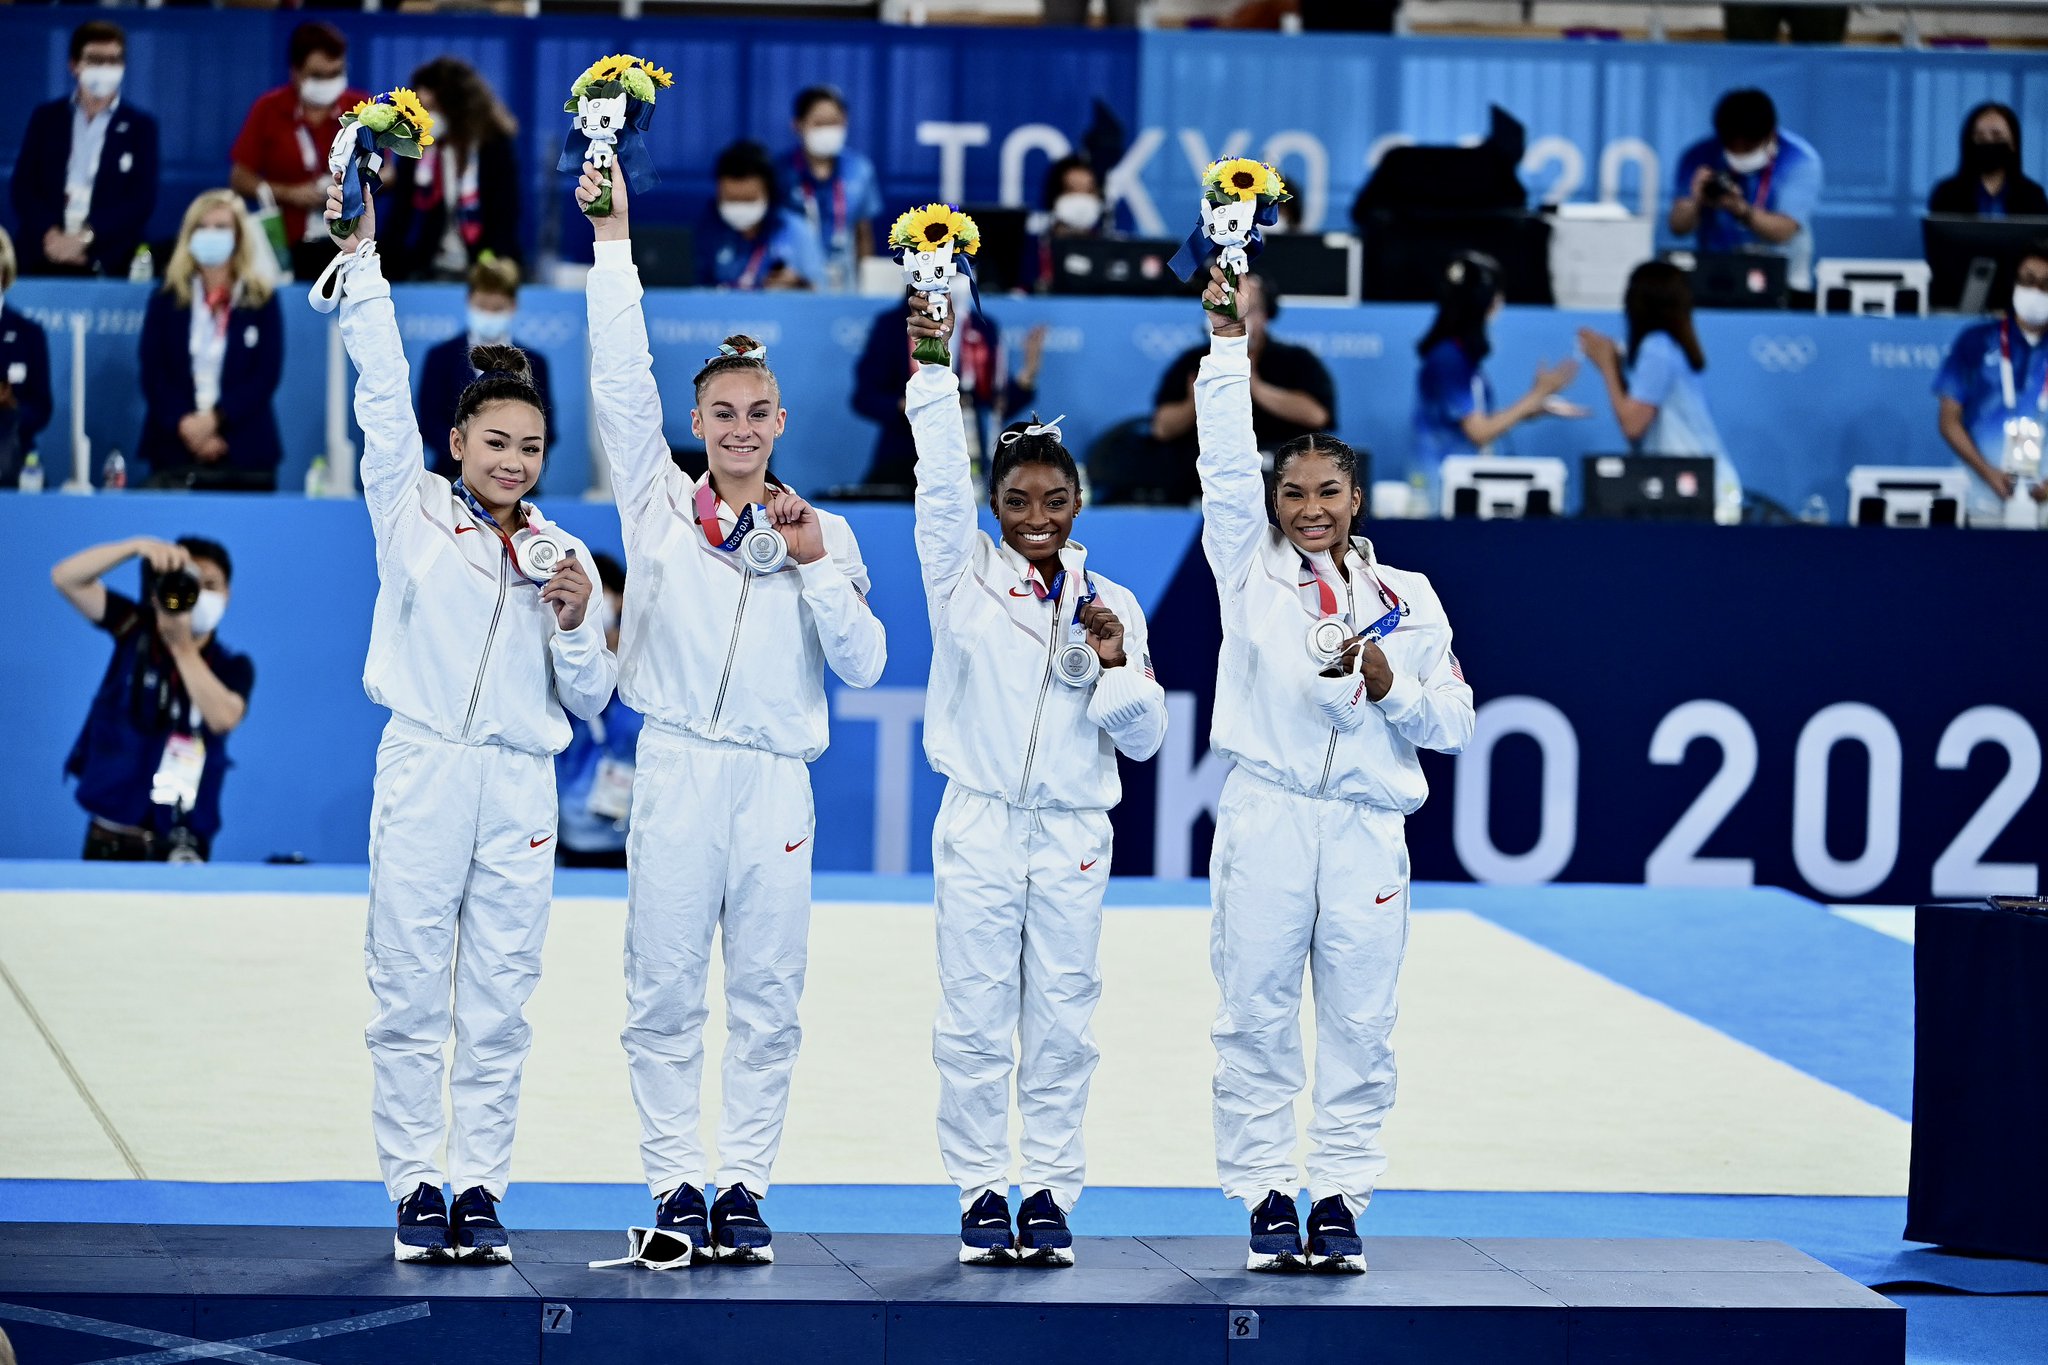 Usa Gymnastics Congratulations To The U S Women For A Hard Fought Silver Medal So Proud Of This Team Tokyo